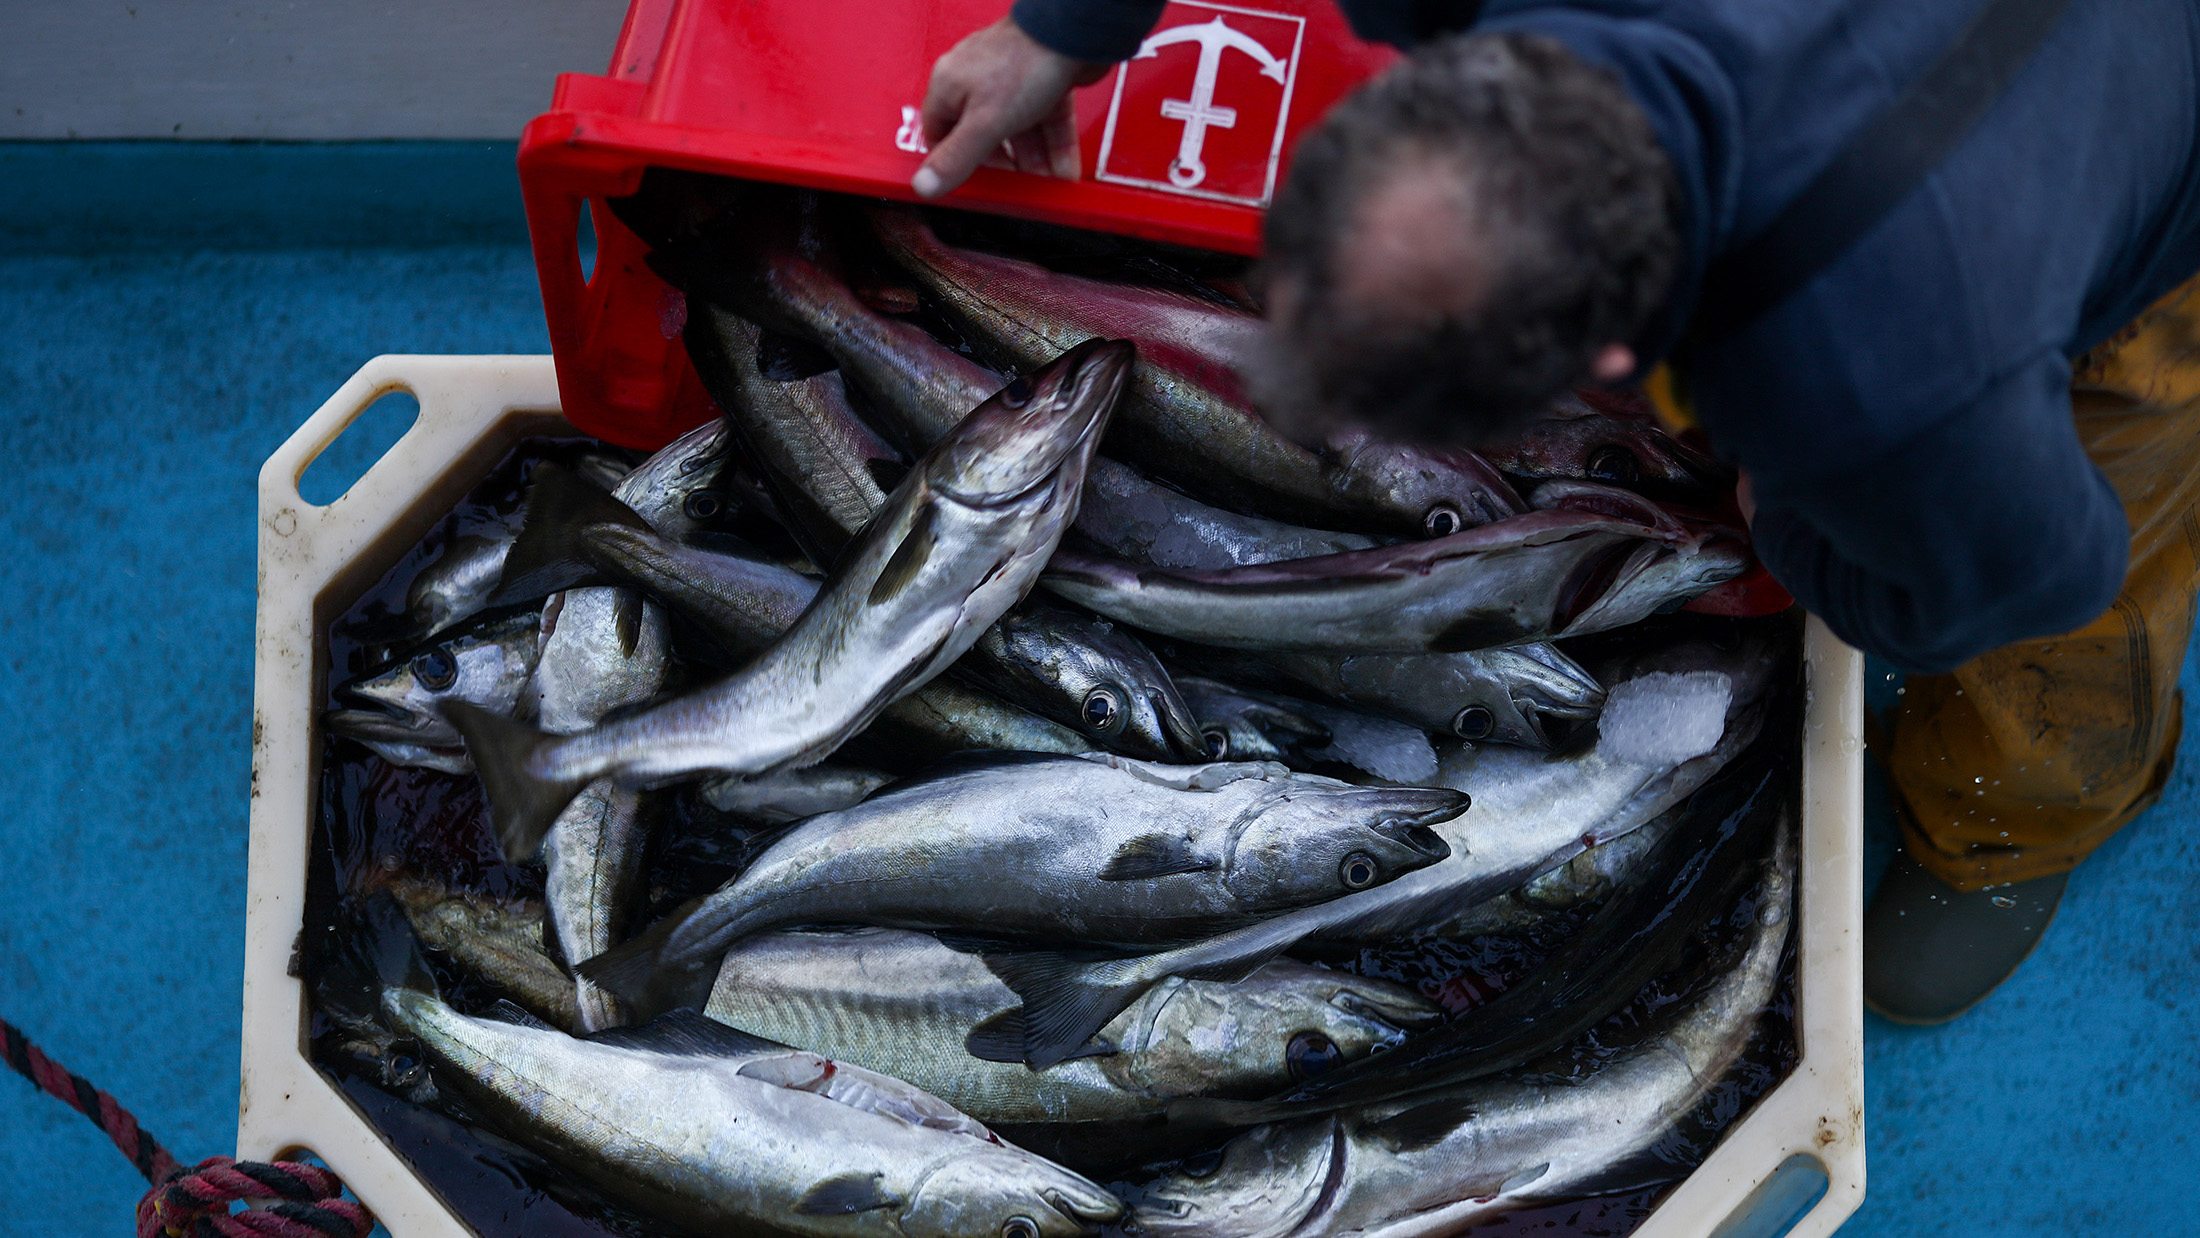 A fisherman sorts a box of line caught pollock in Newlyn harbour in Newlyn, U.K.
